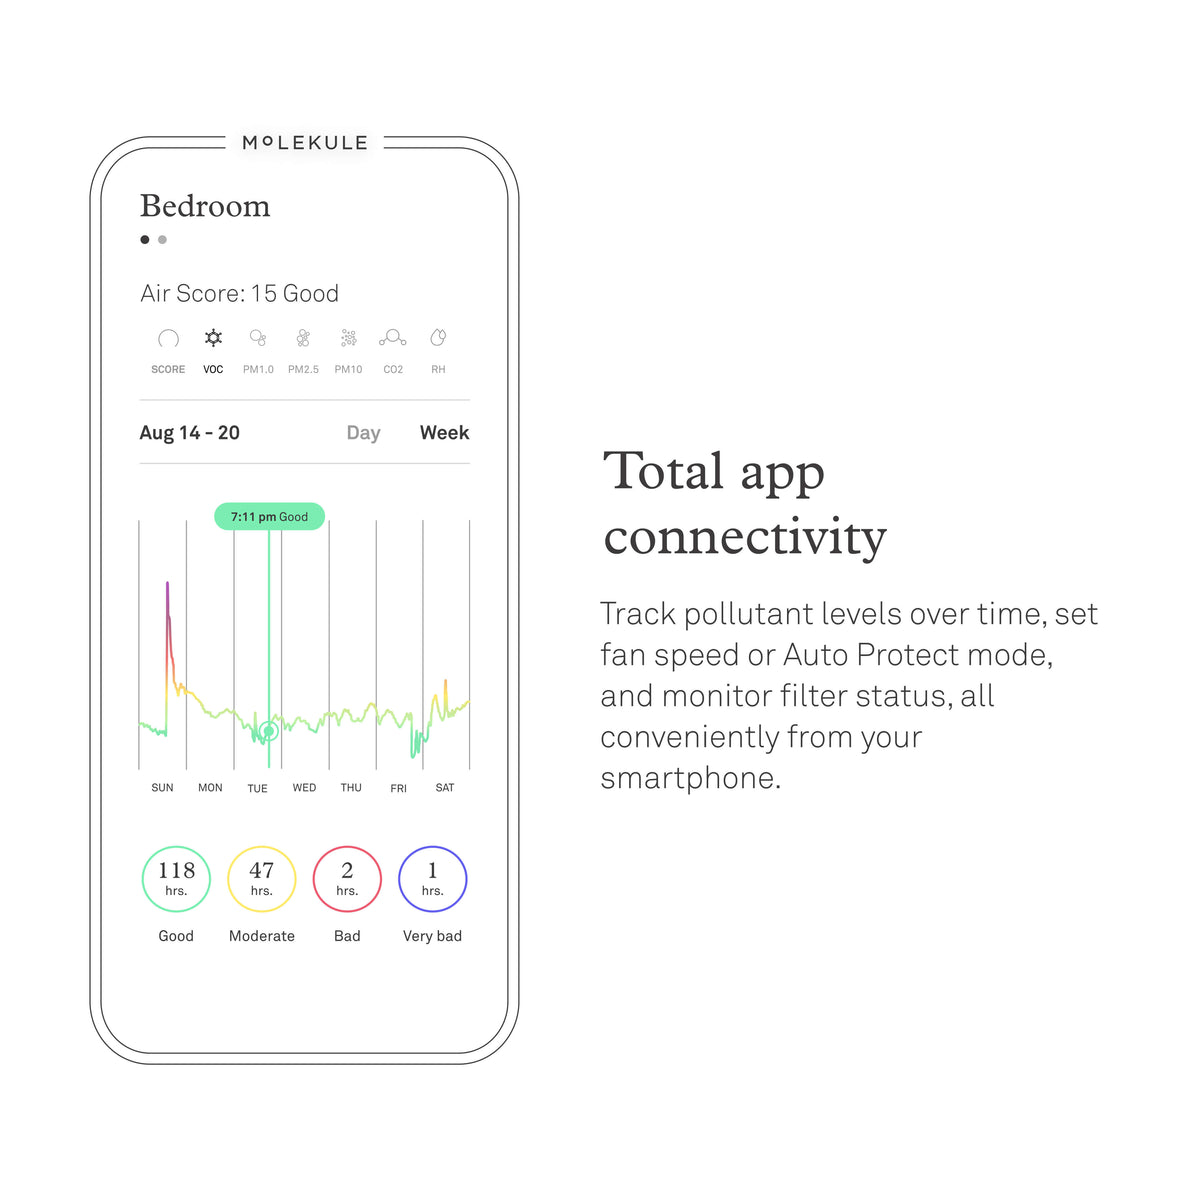 Molekule mobile app. Total app connectivity. Track particle level over time, set fan speed, and monitor filter status, all conveniently from your smartphone.